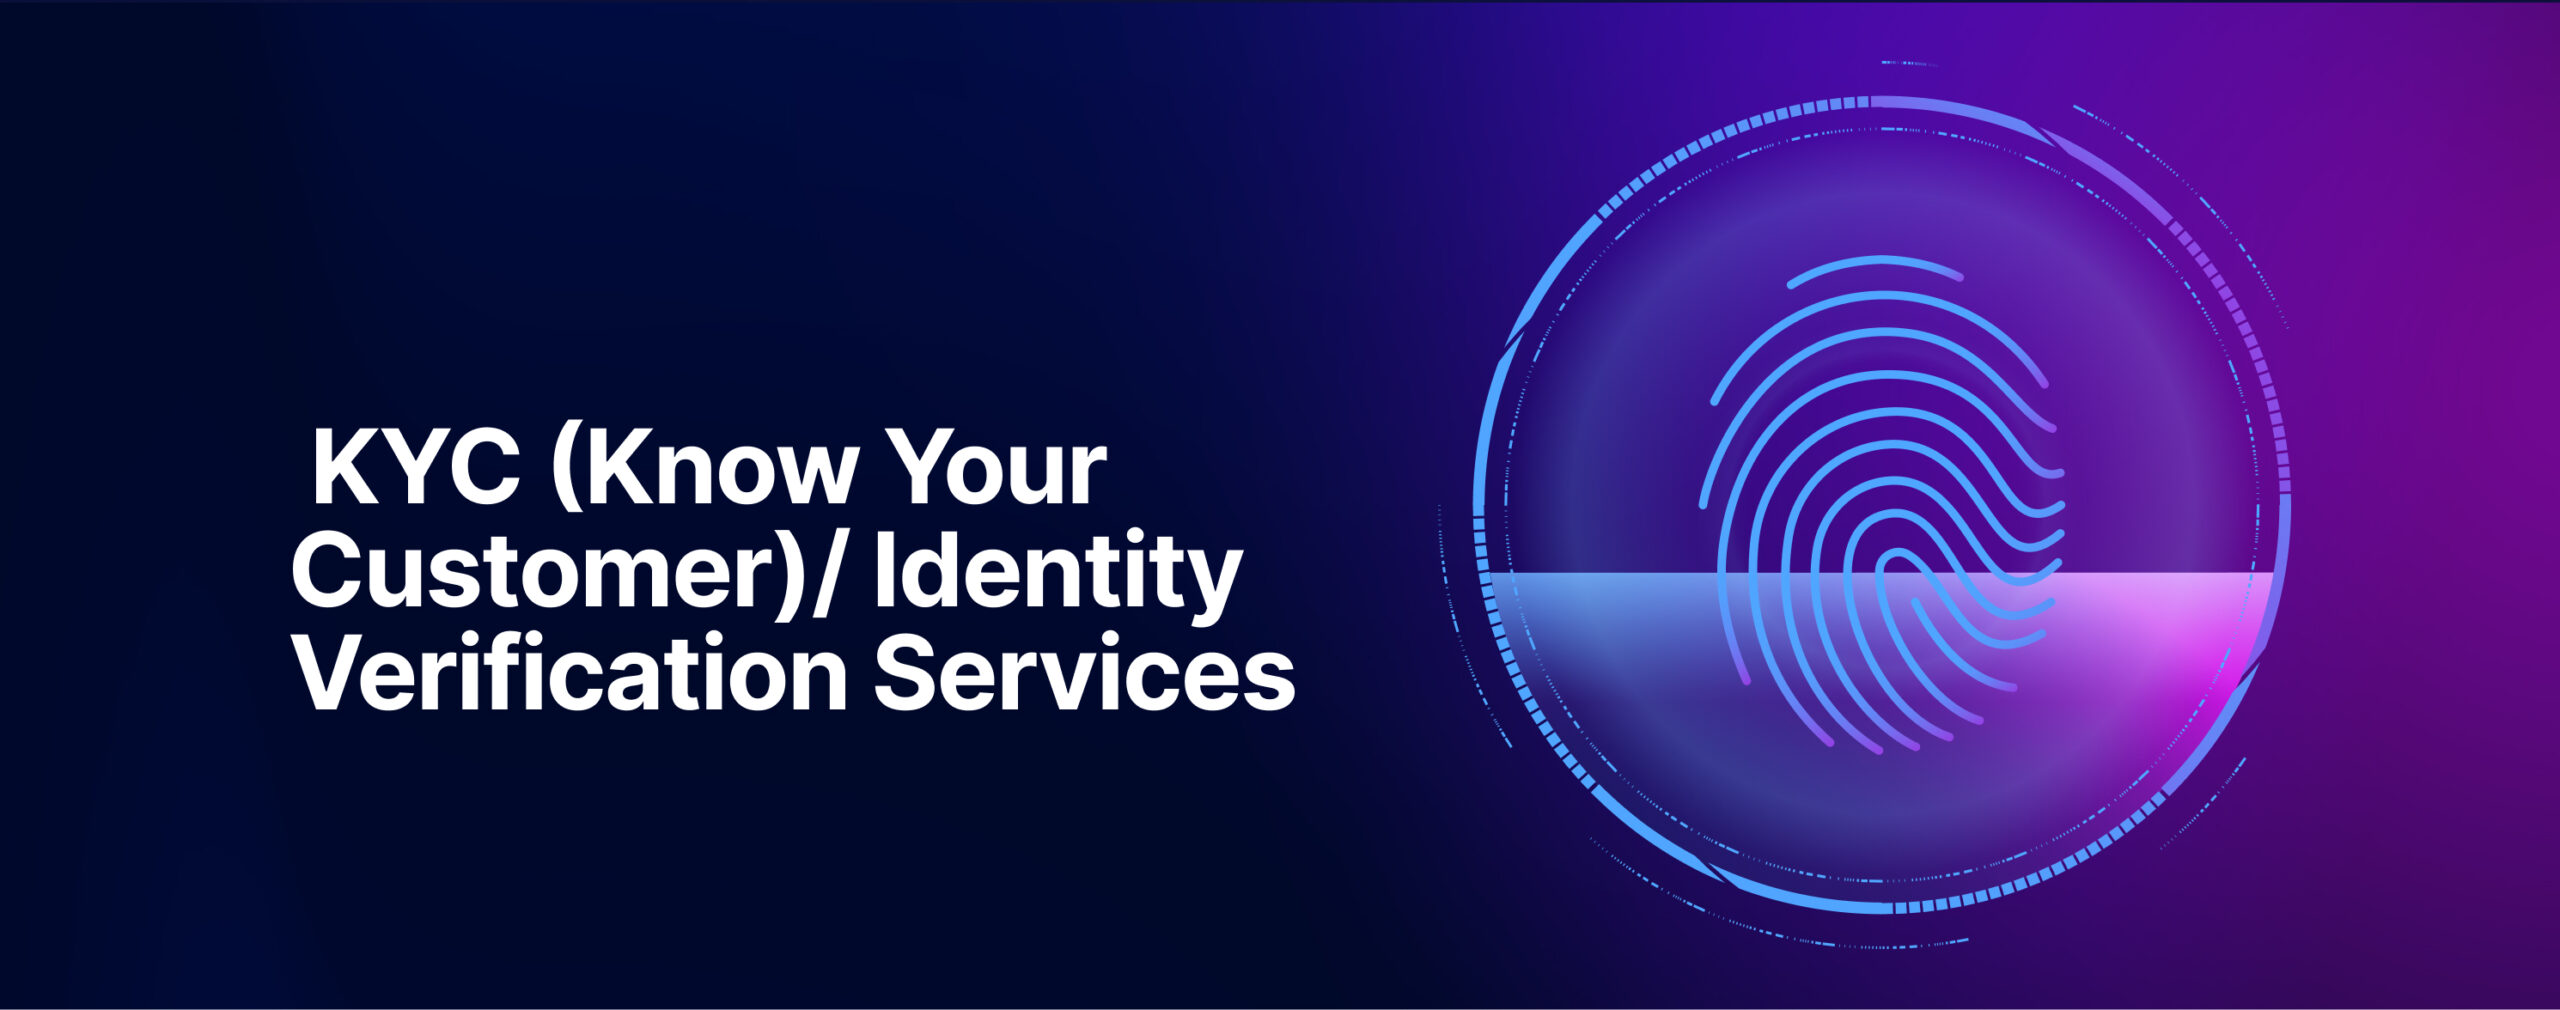 Identity-Verification-Services. Banking as a Service